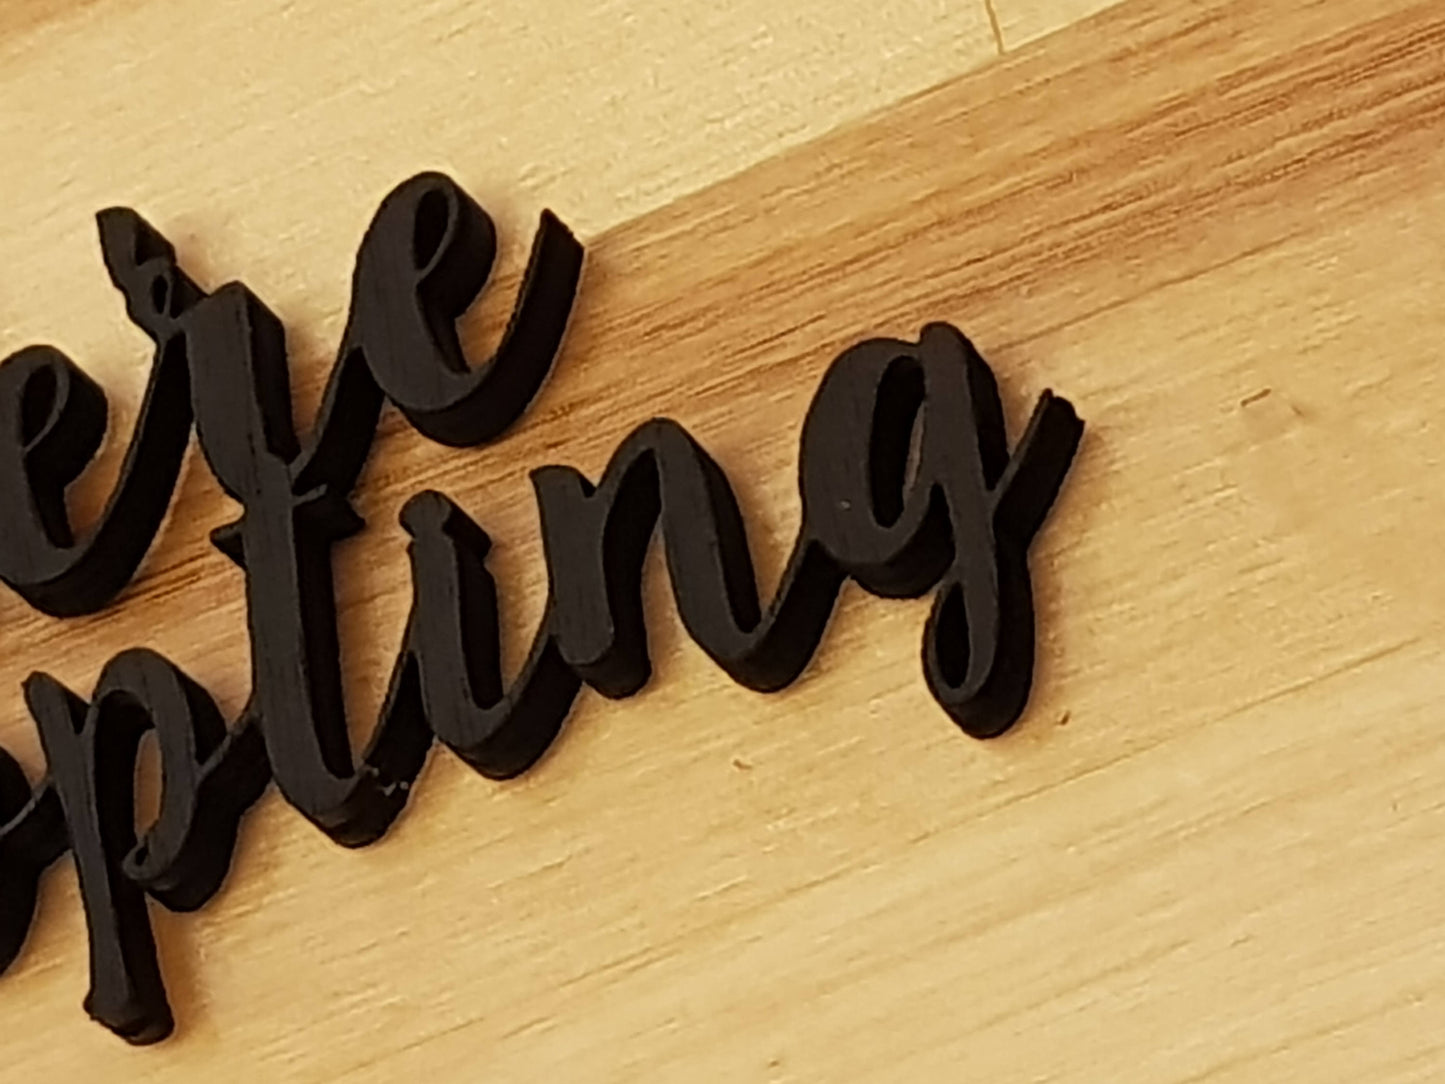 We're Adopting, Adopting Sign, Adoption, Picture Prop, Wooden Words, Laser Cut Out, Wood Cut Out, Custom Word Art, , Footstepsinthepast